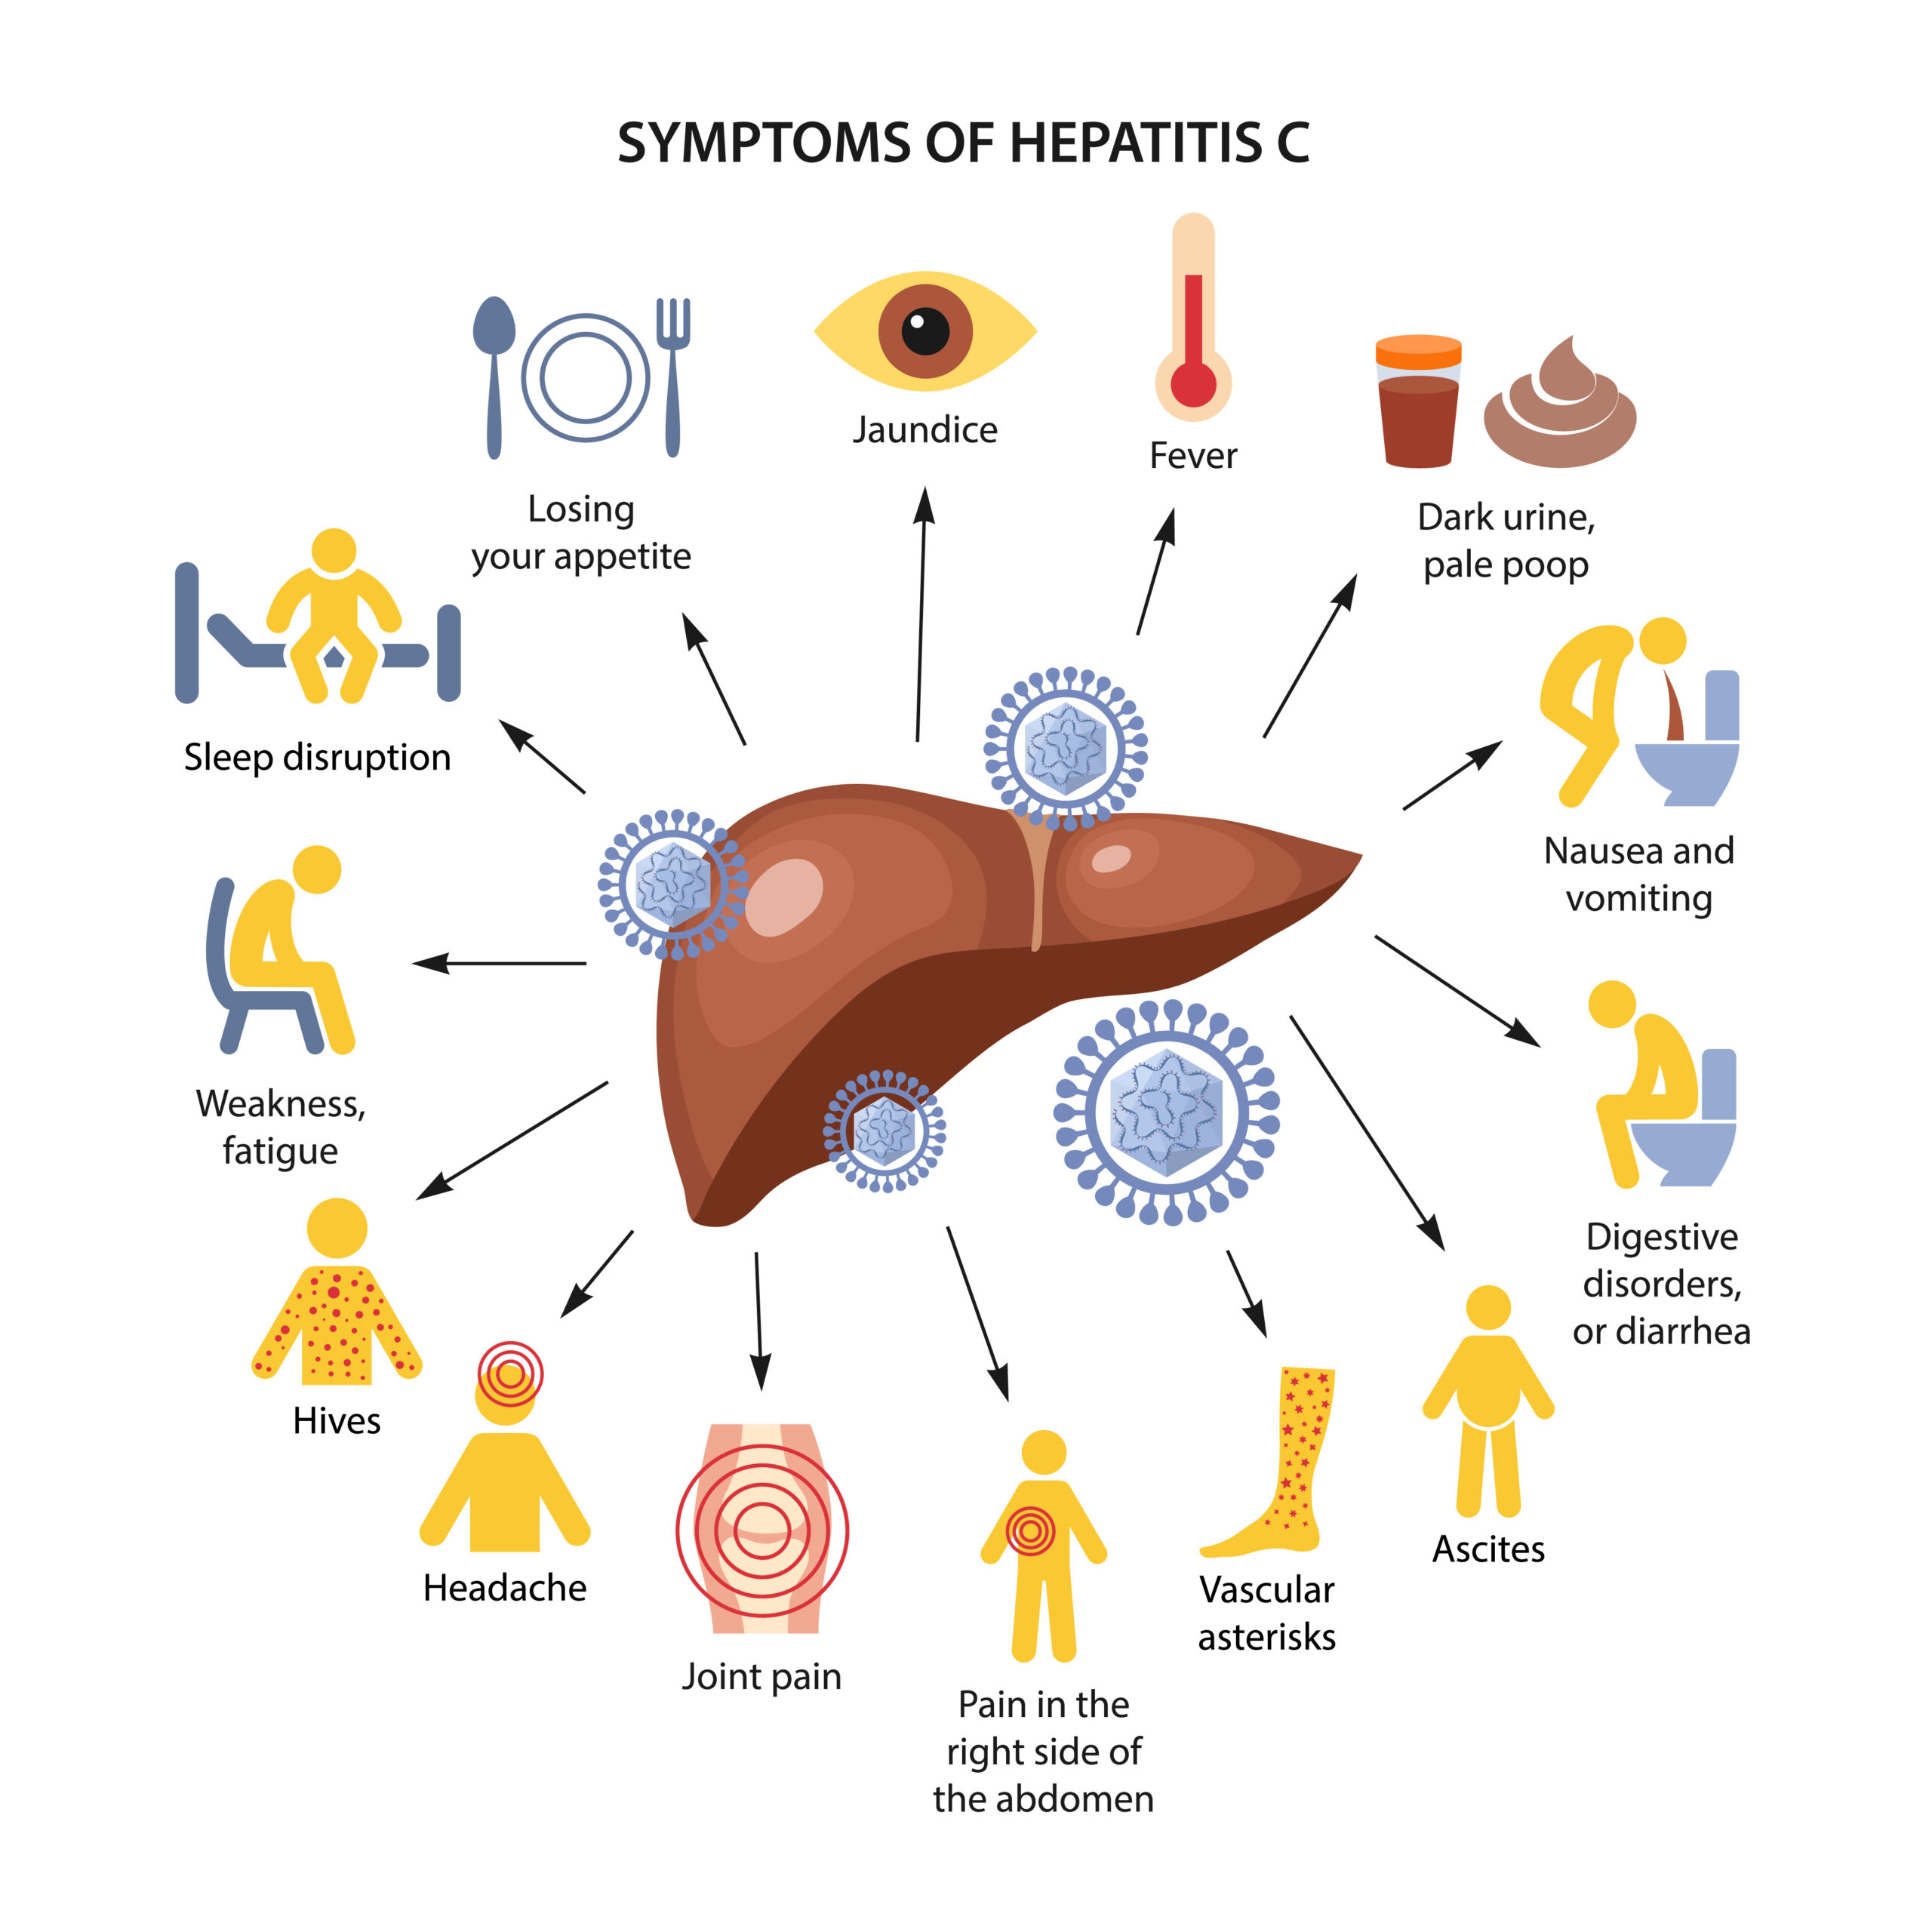 Hepatitis C: What Is, Symptoms, Transmission, and Treatment